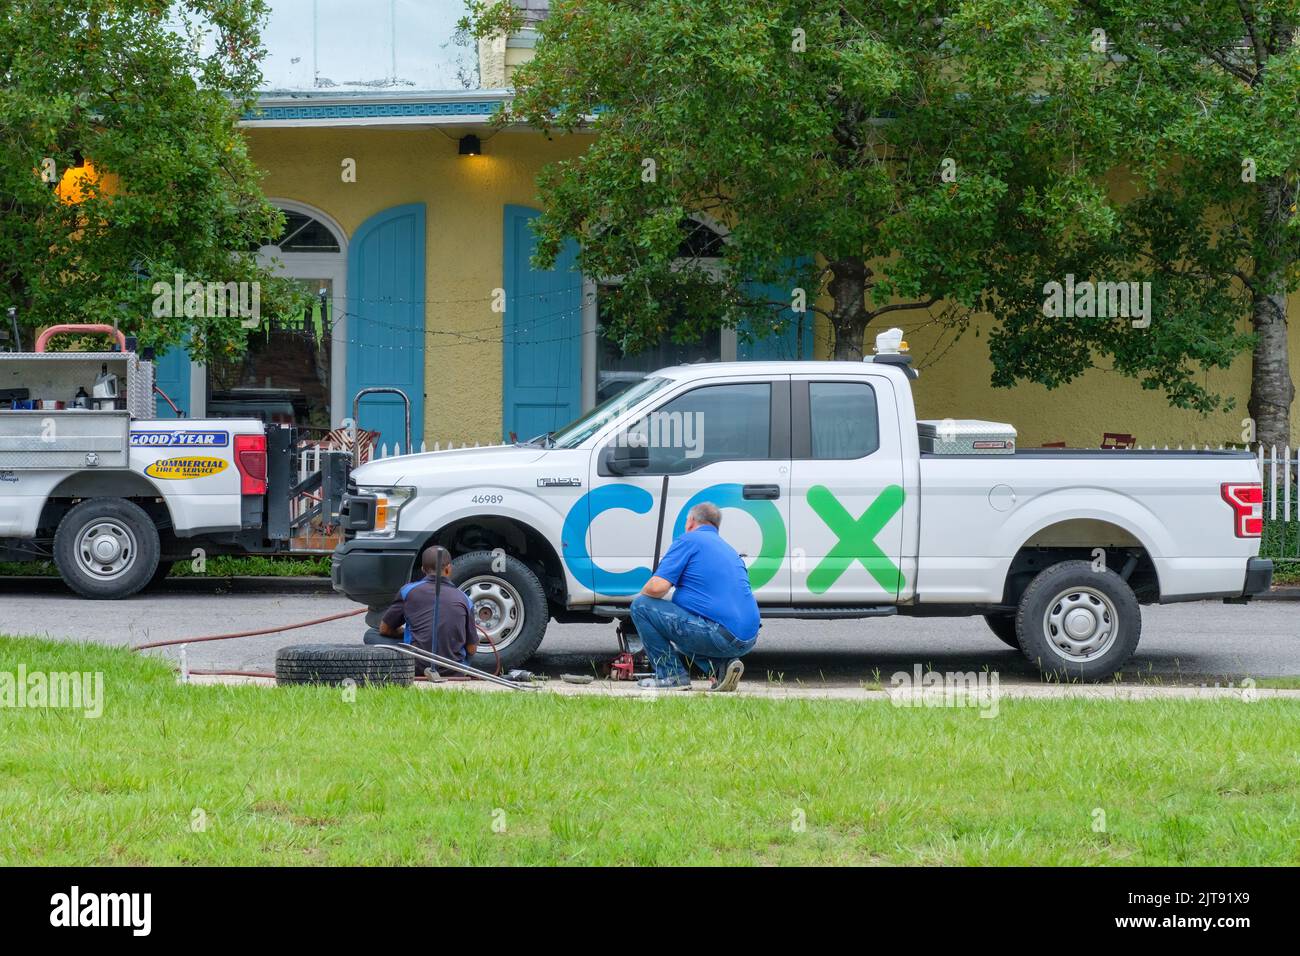 NEW ORLEANS, LA, USA - AUGUST 24, 2022: Repairman from Goodyear Roadside Service changes a tire on a Cox Cable truck as the Cox worker looks on Stock Photo